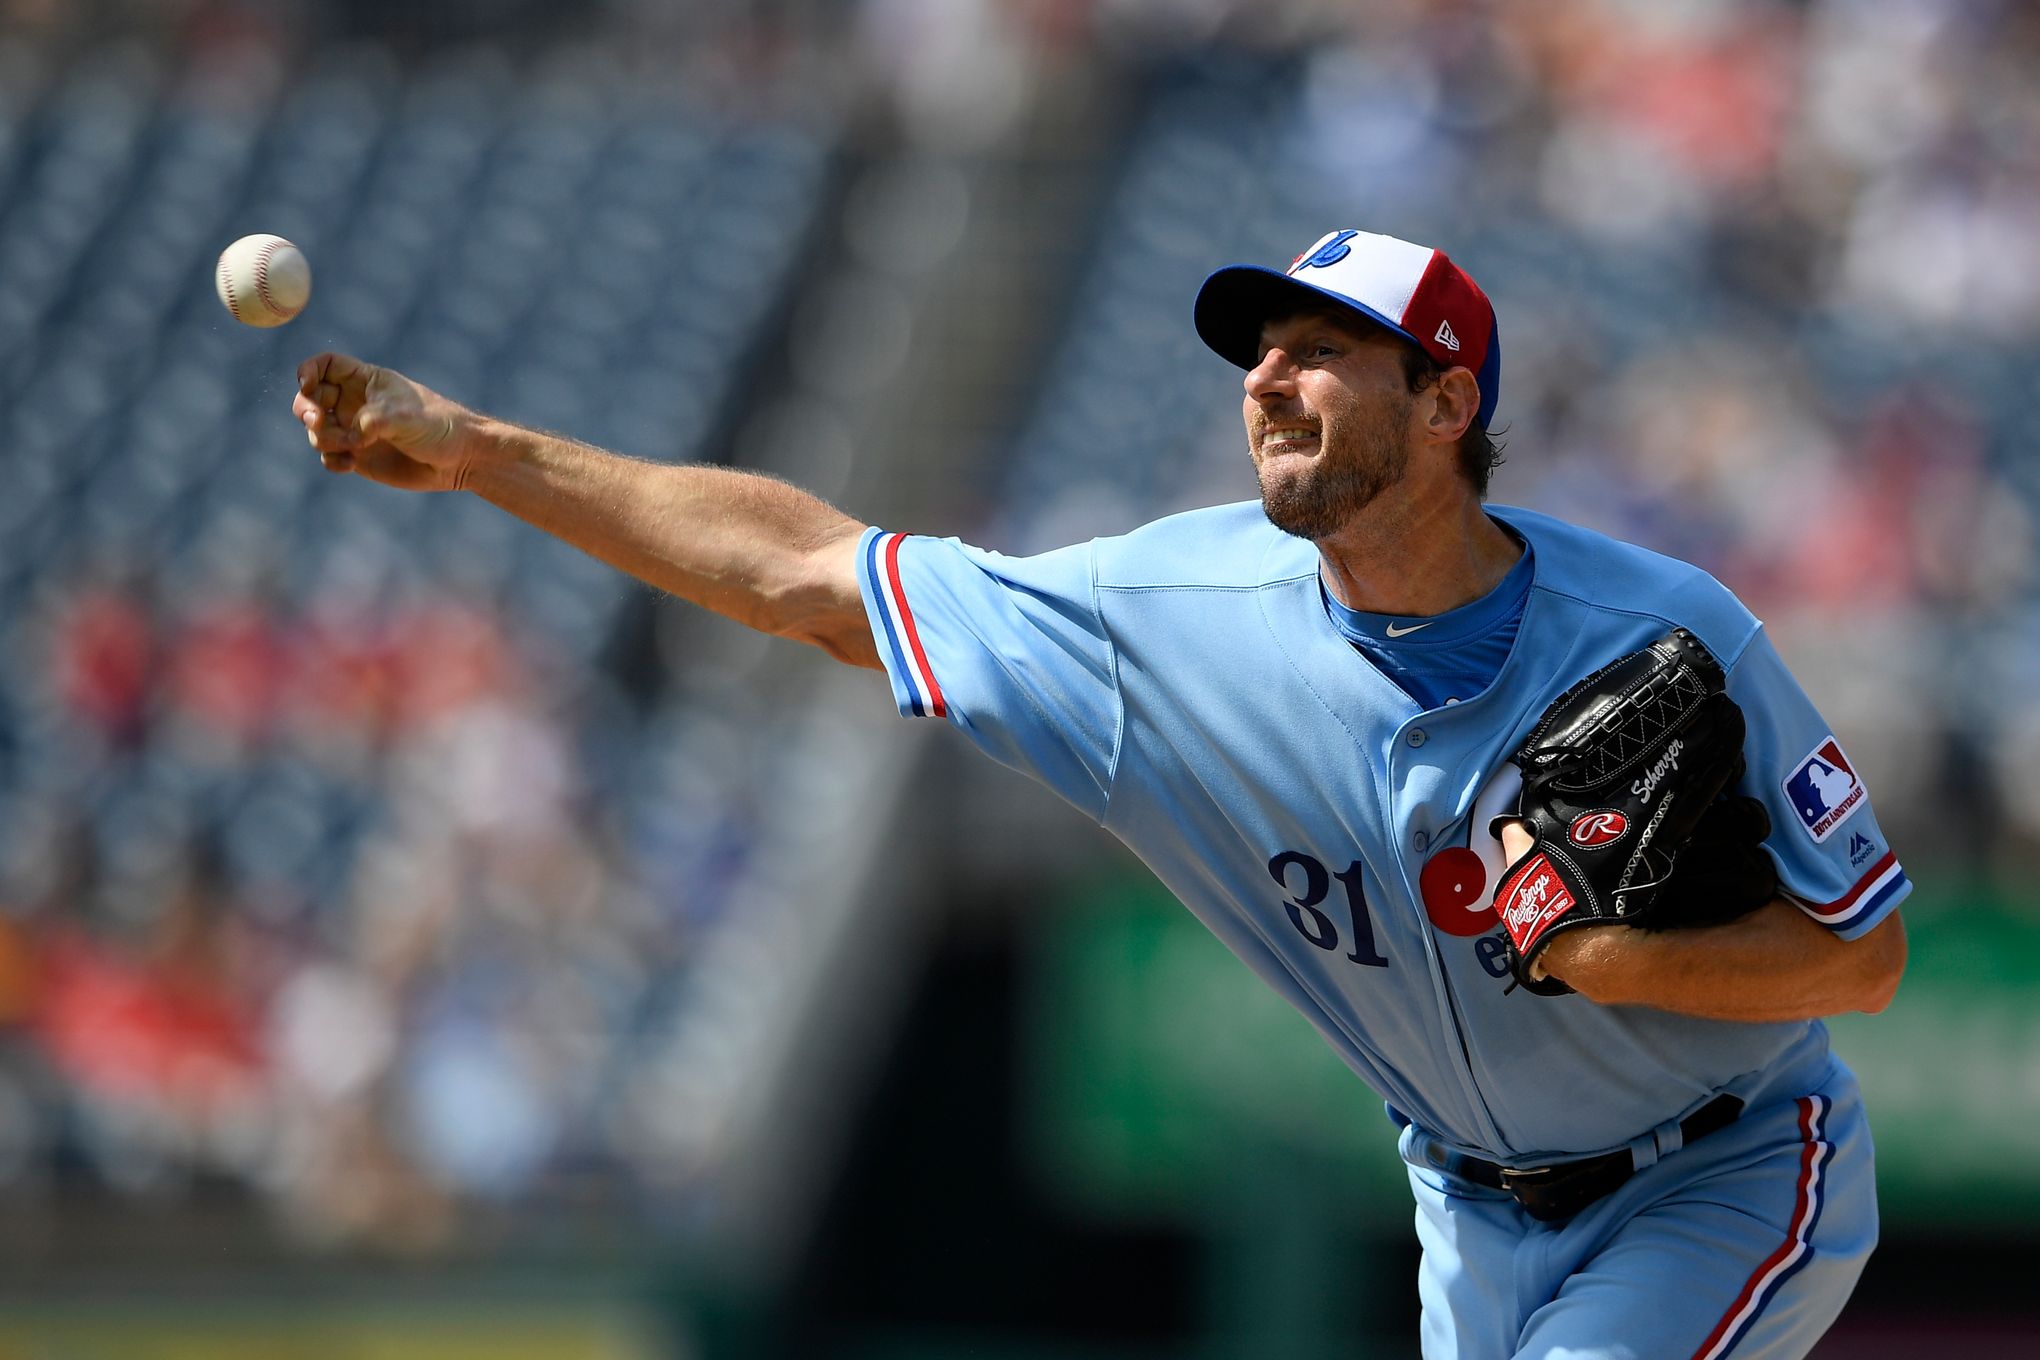 Washington Nationals to wear throwback Expos uniforms on July 6